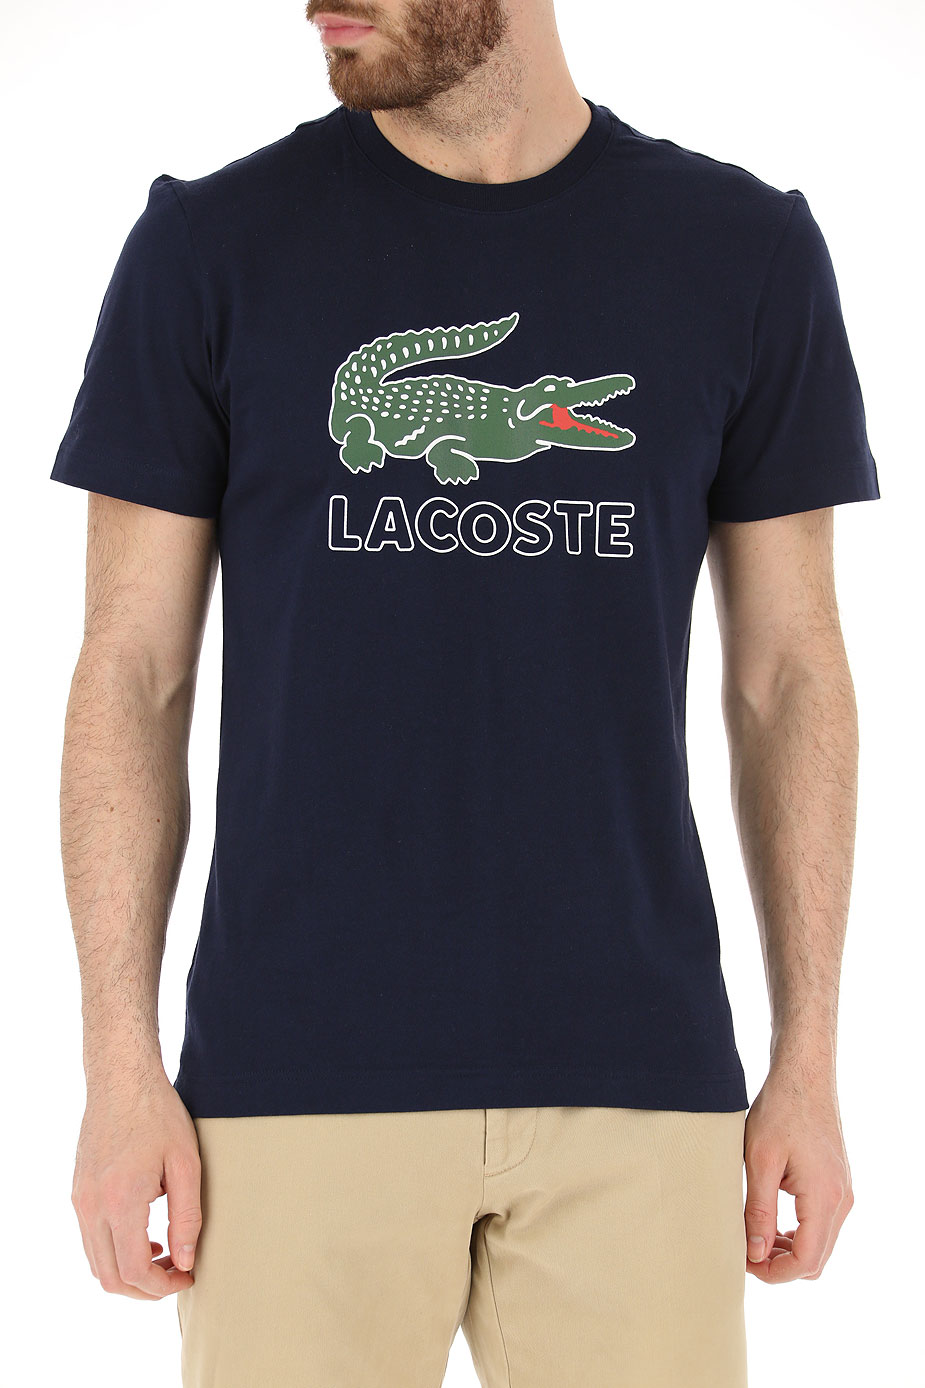 Mens Clothing Lacoste, Style code: 419806-166-